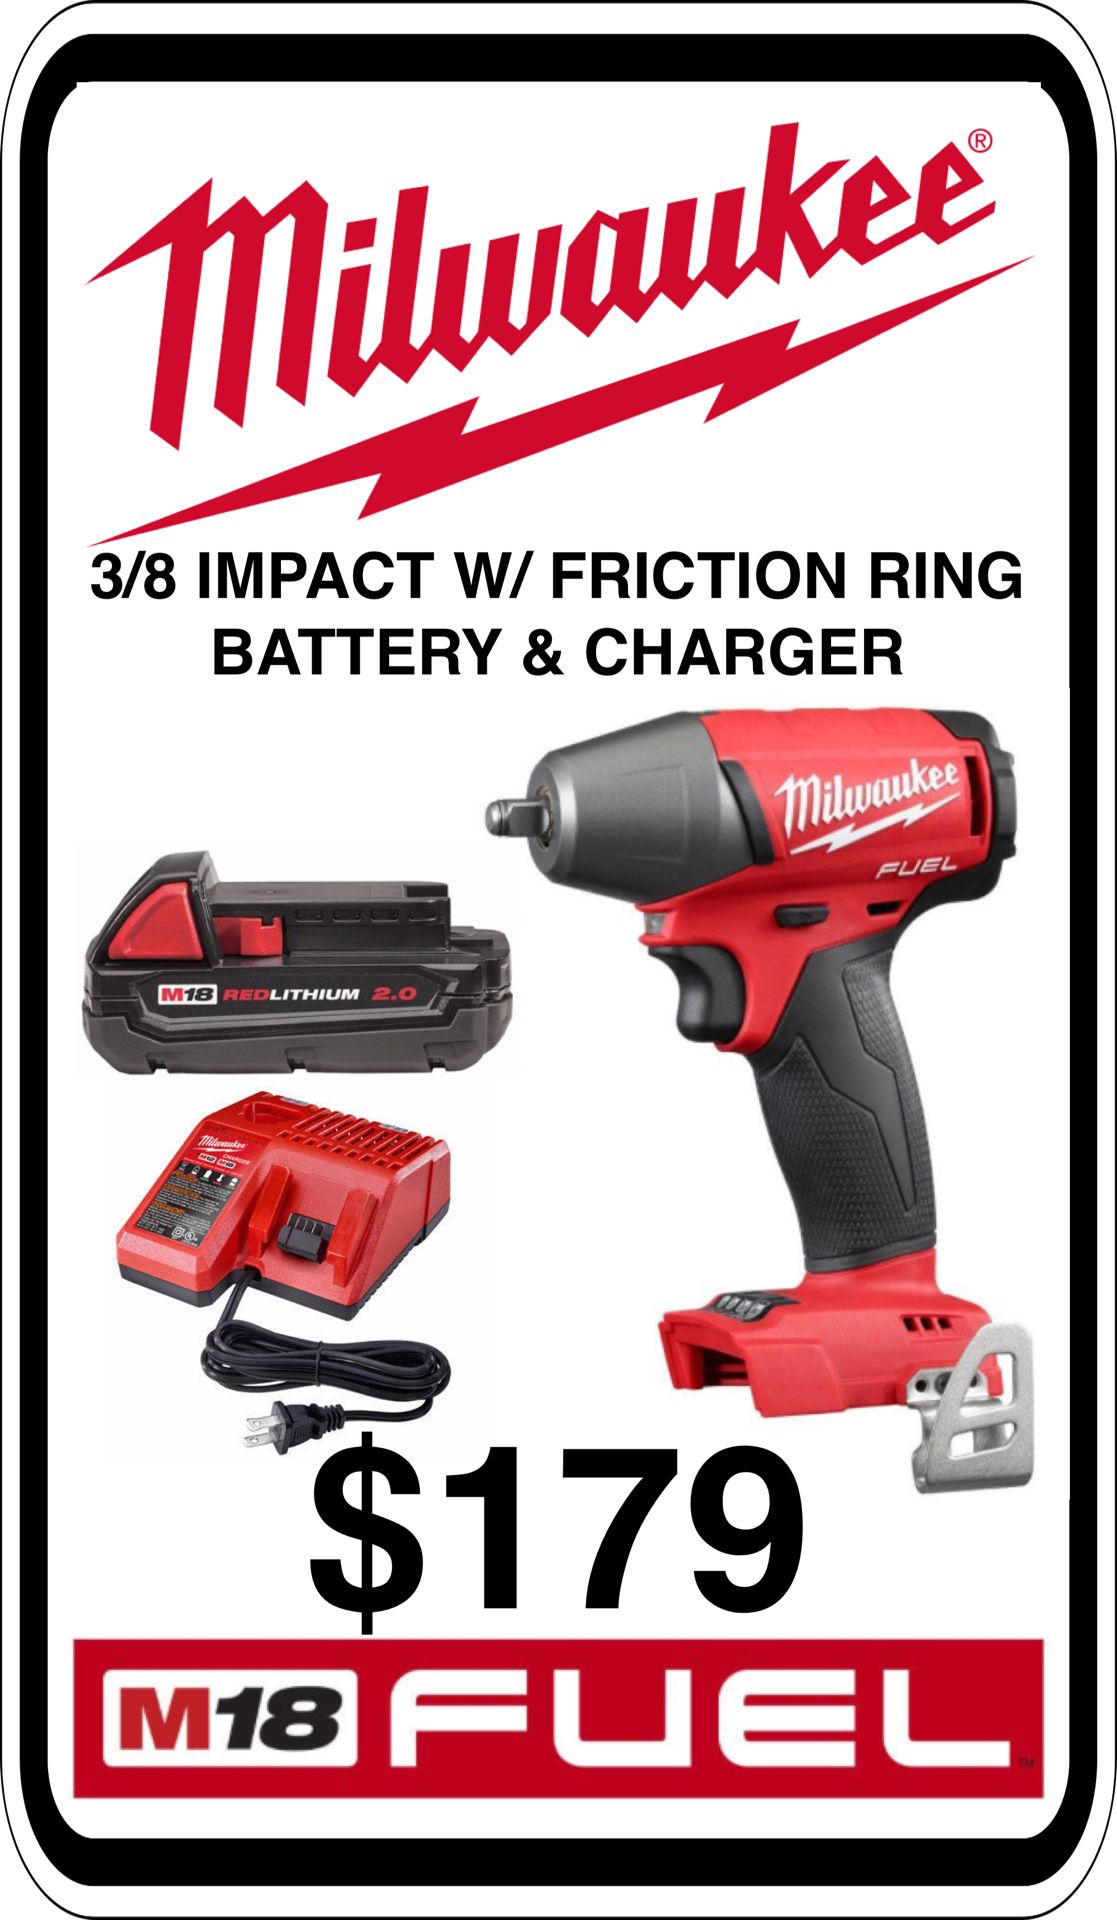 BRAND NEW - Milwaukee M18 3/8 Impact w/ Friction Ring - Charger & Battery - We accept trades & Credit Cards - AzBE Deals